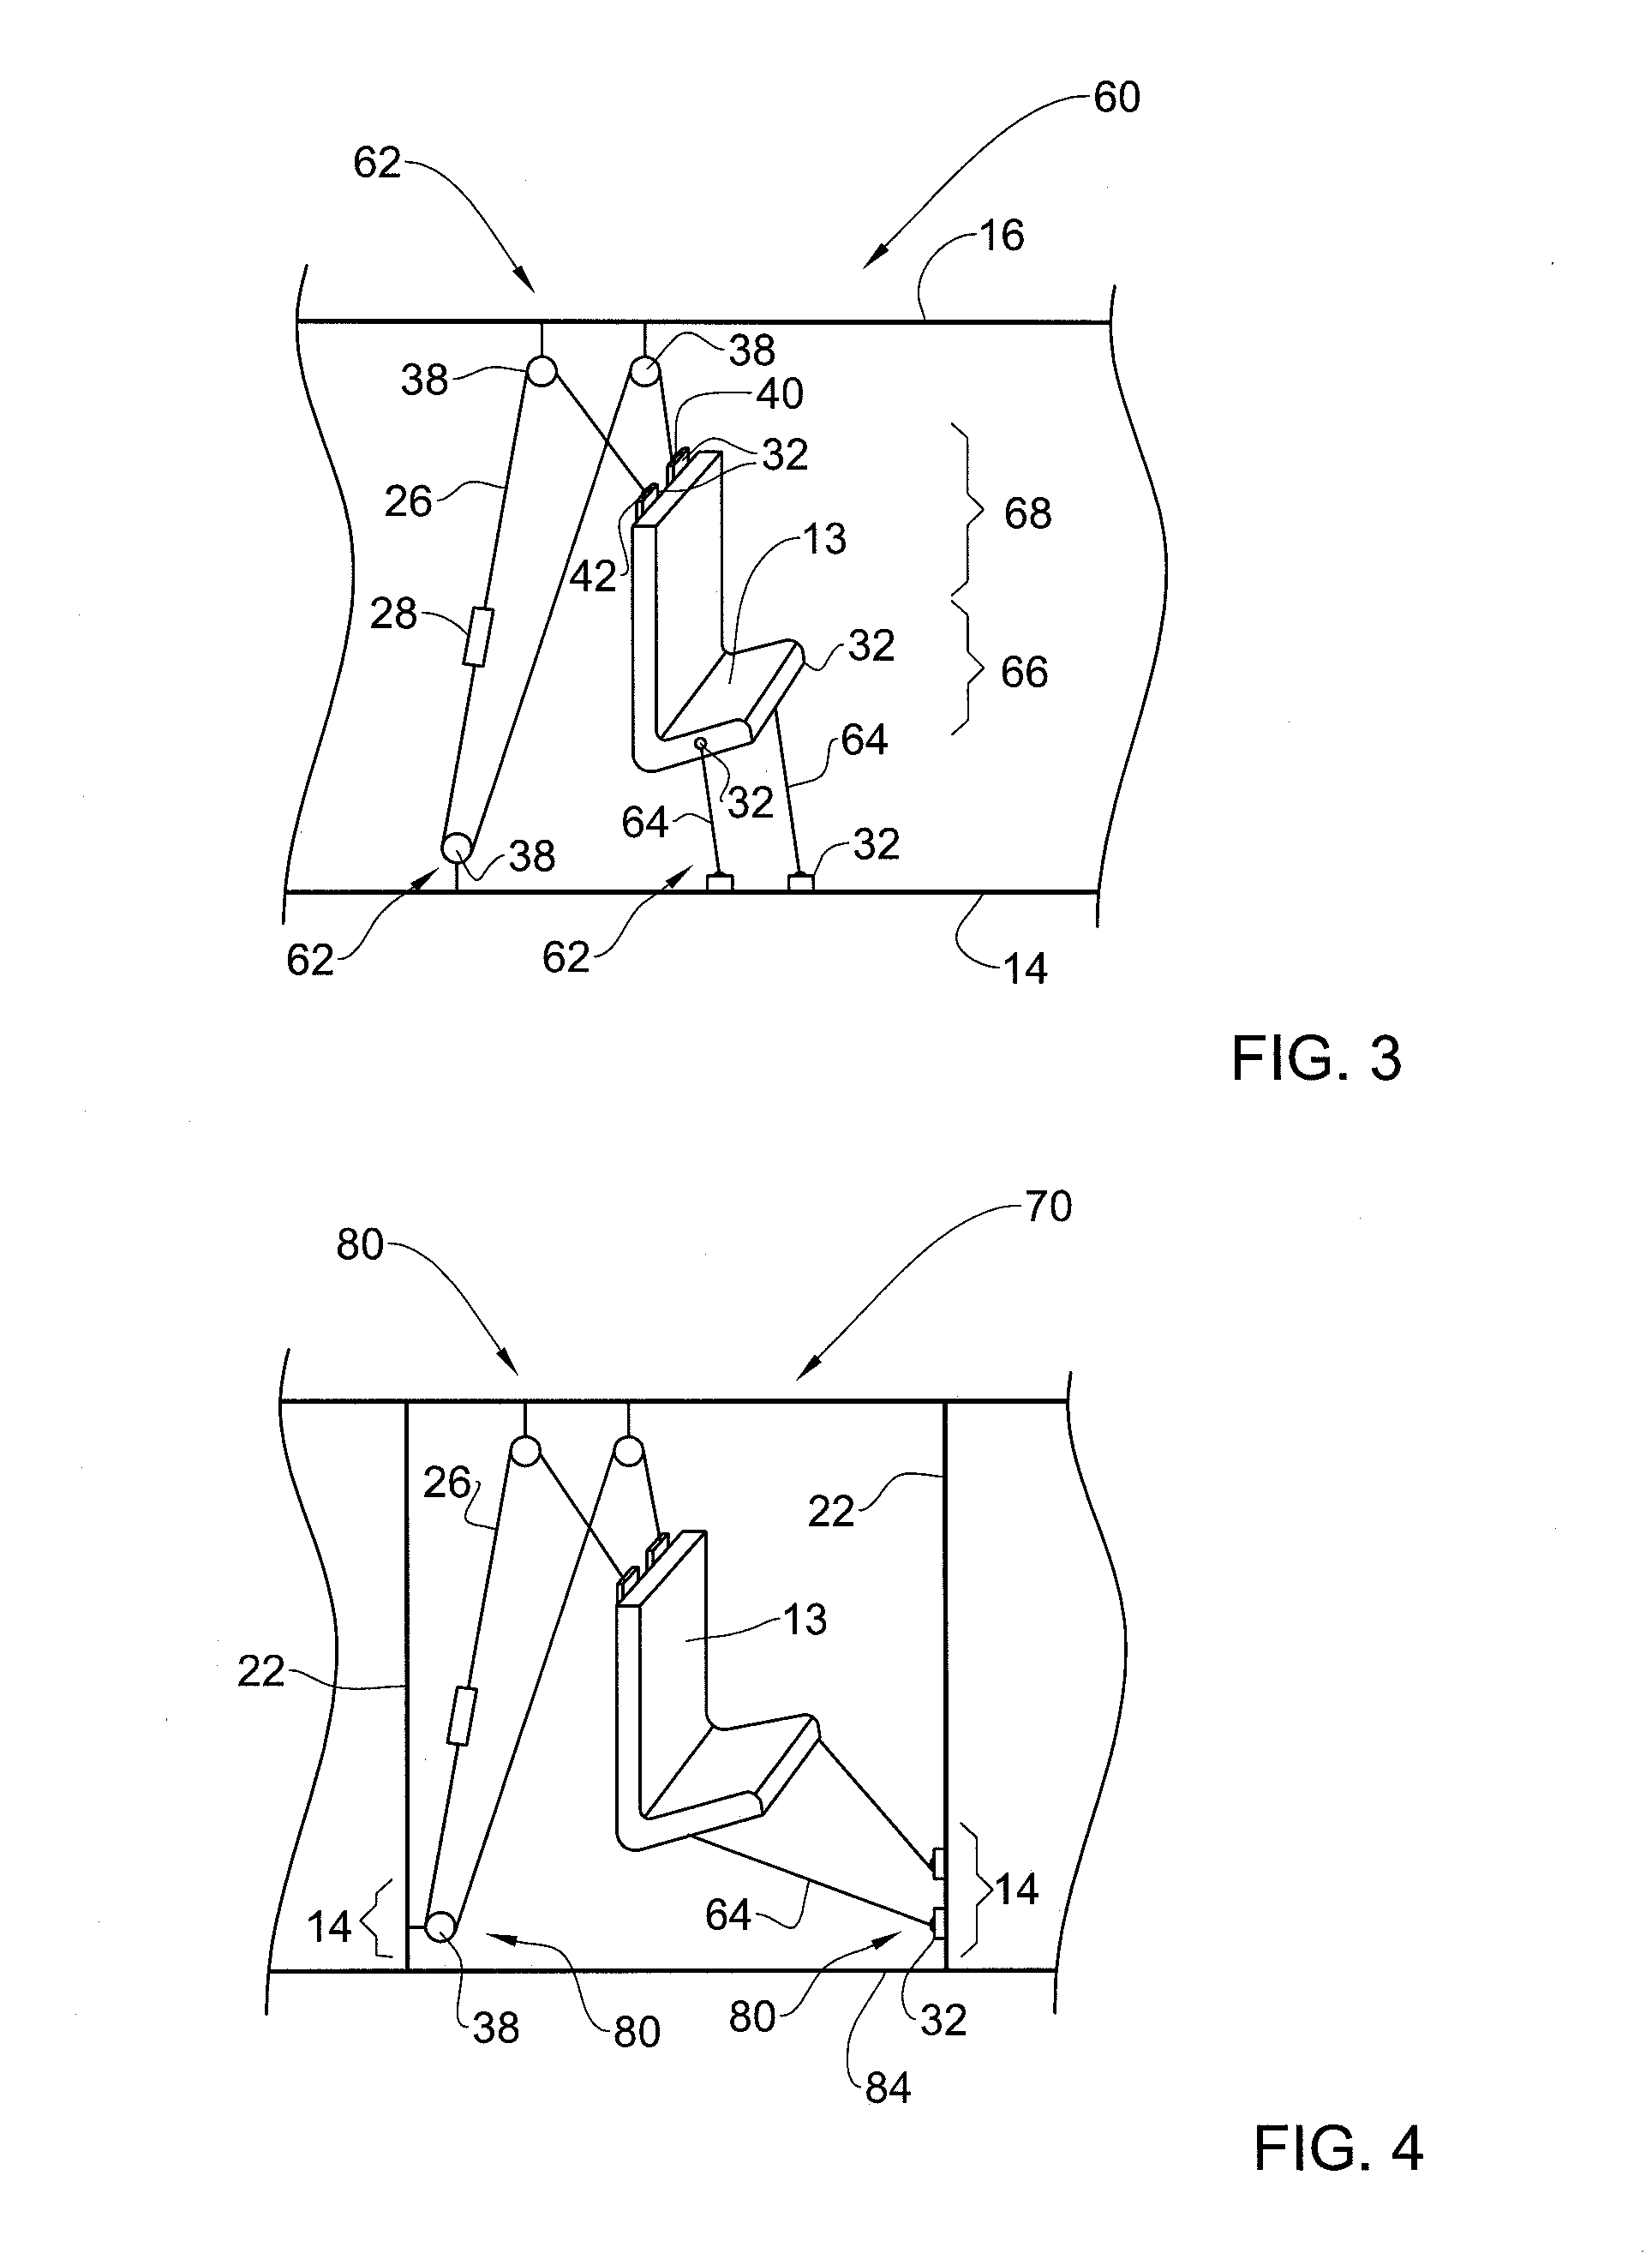 Method and suspension apparatus for suspending an object in a vehicle